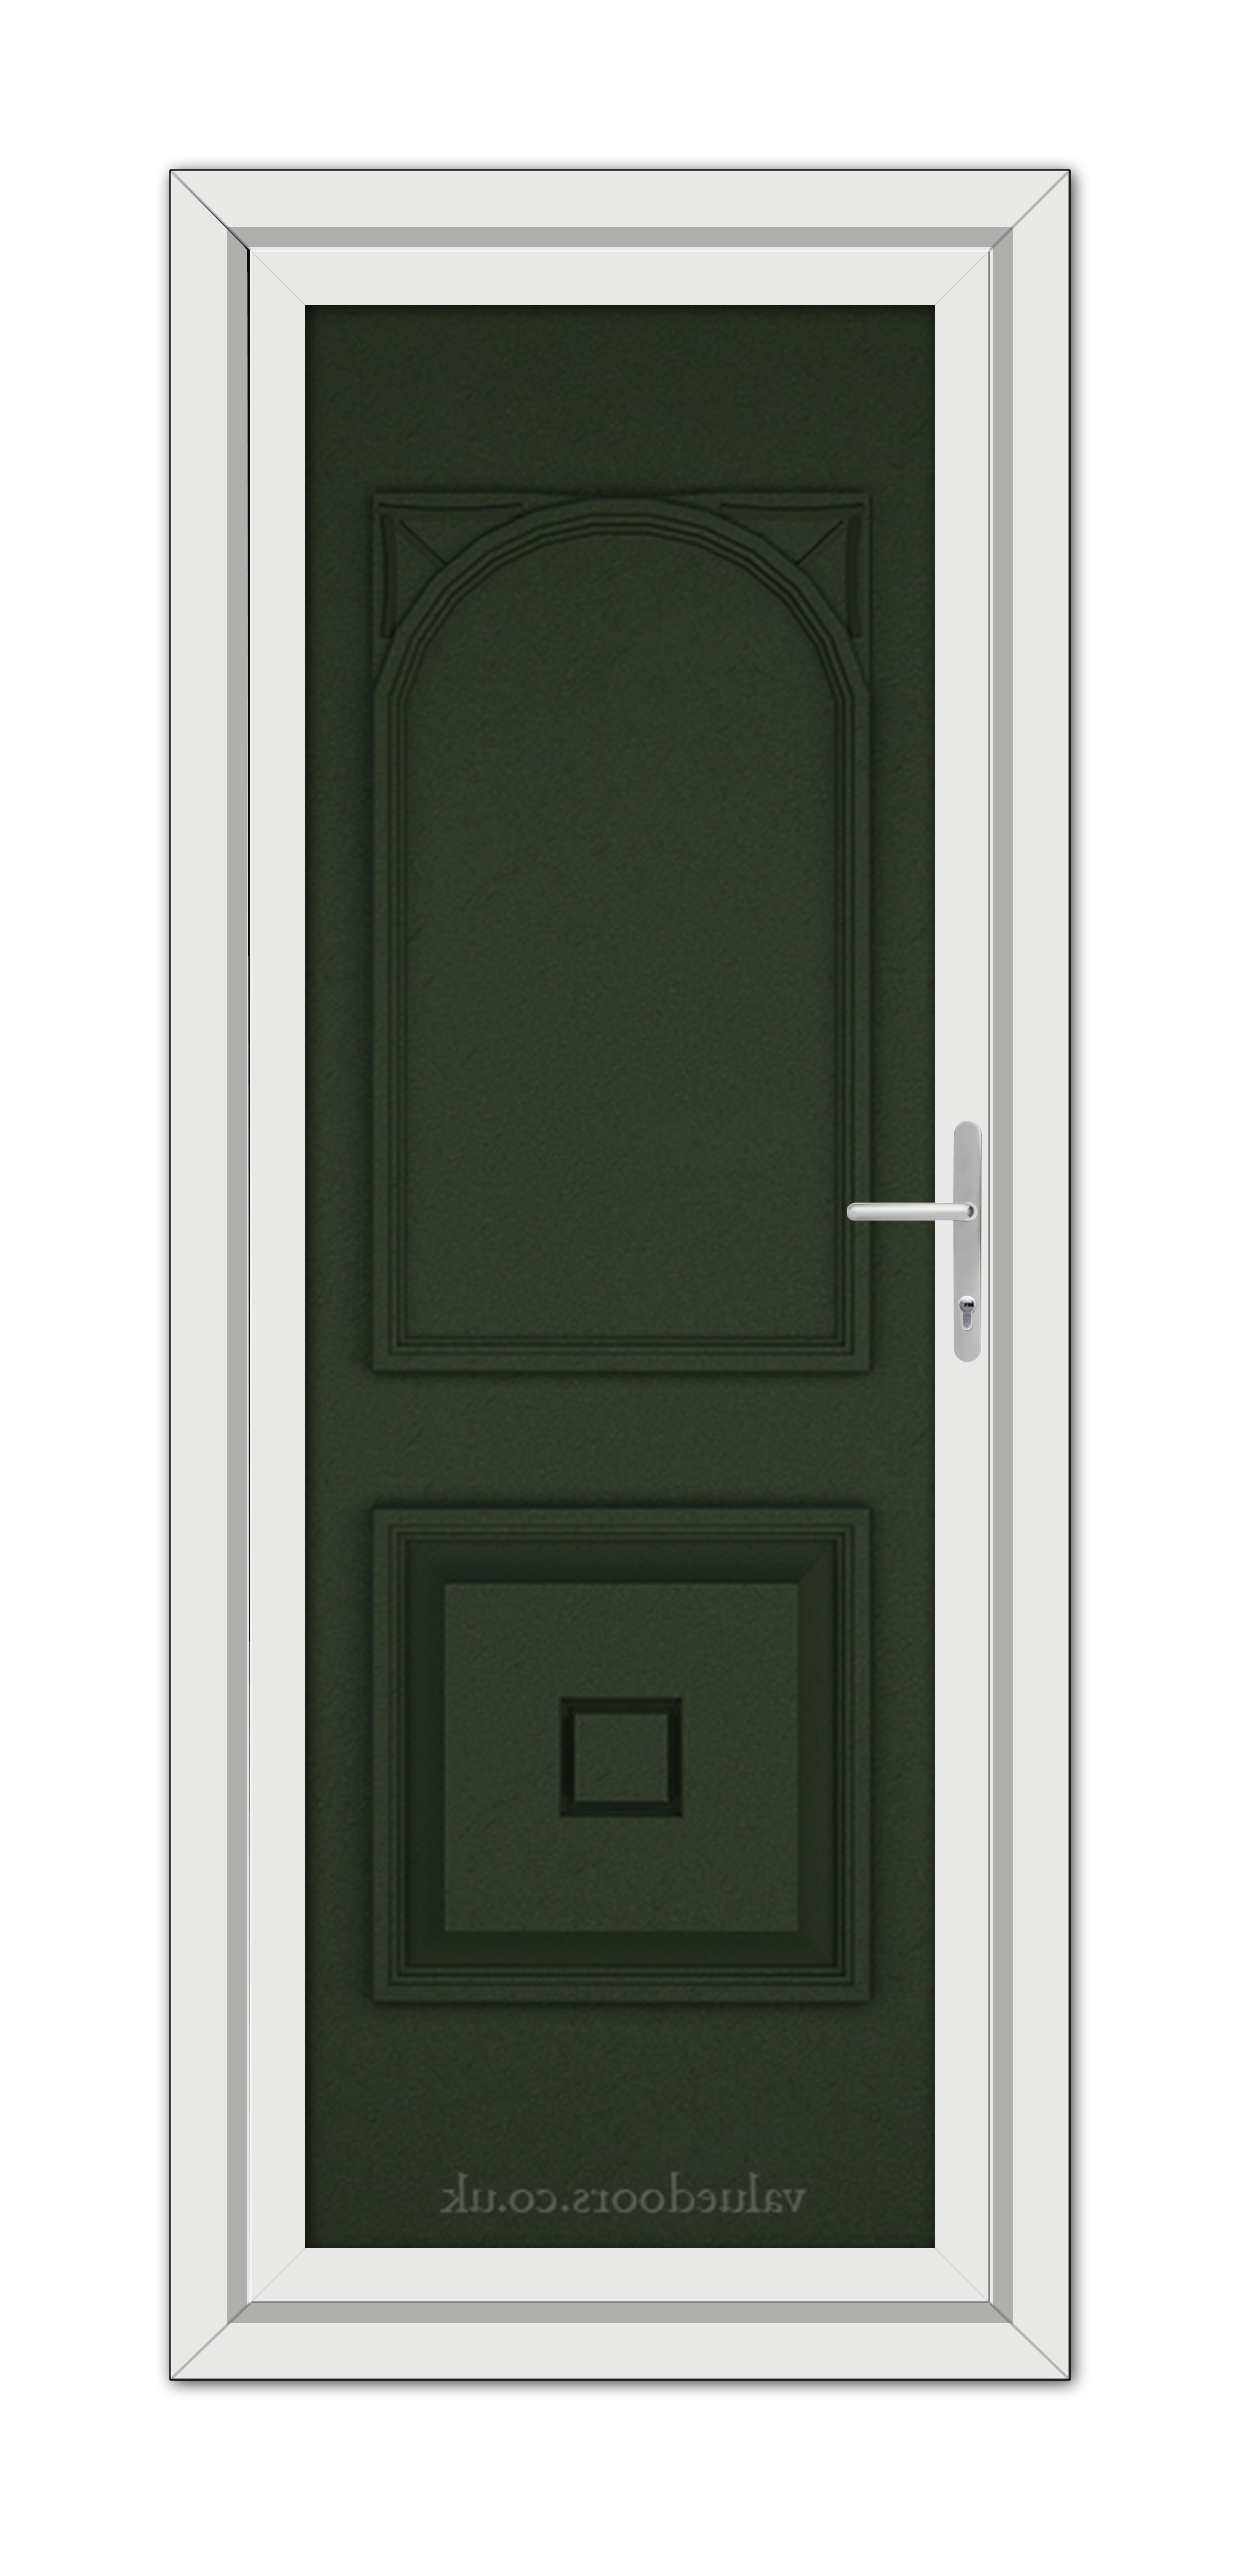 A Green Reims Solid uPVC door with a rectangular upper panel and a square lower panel, featuring a white handle, set in a white door frame.